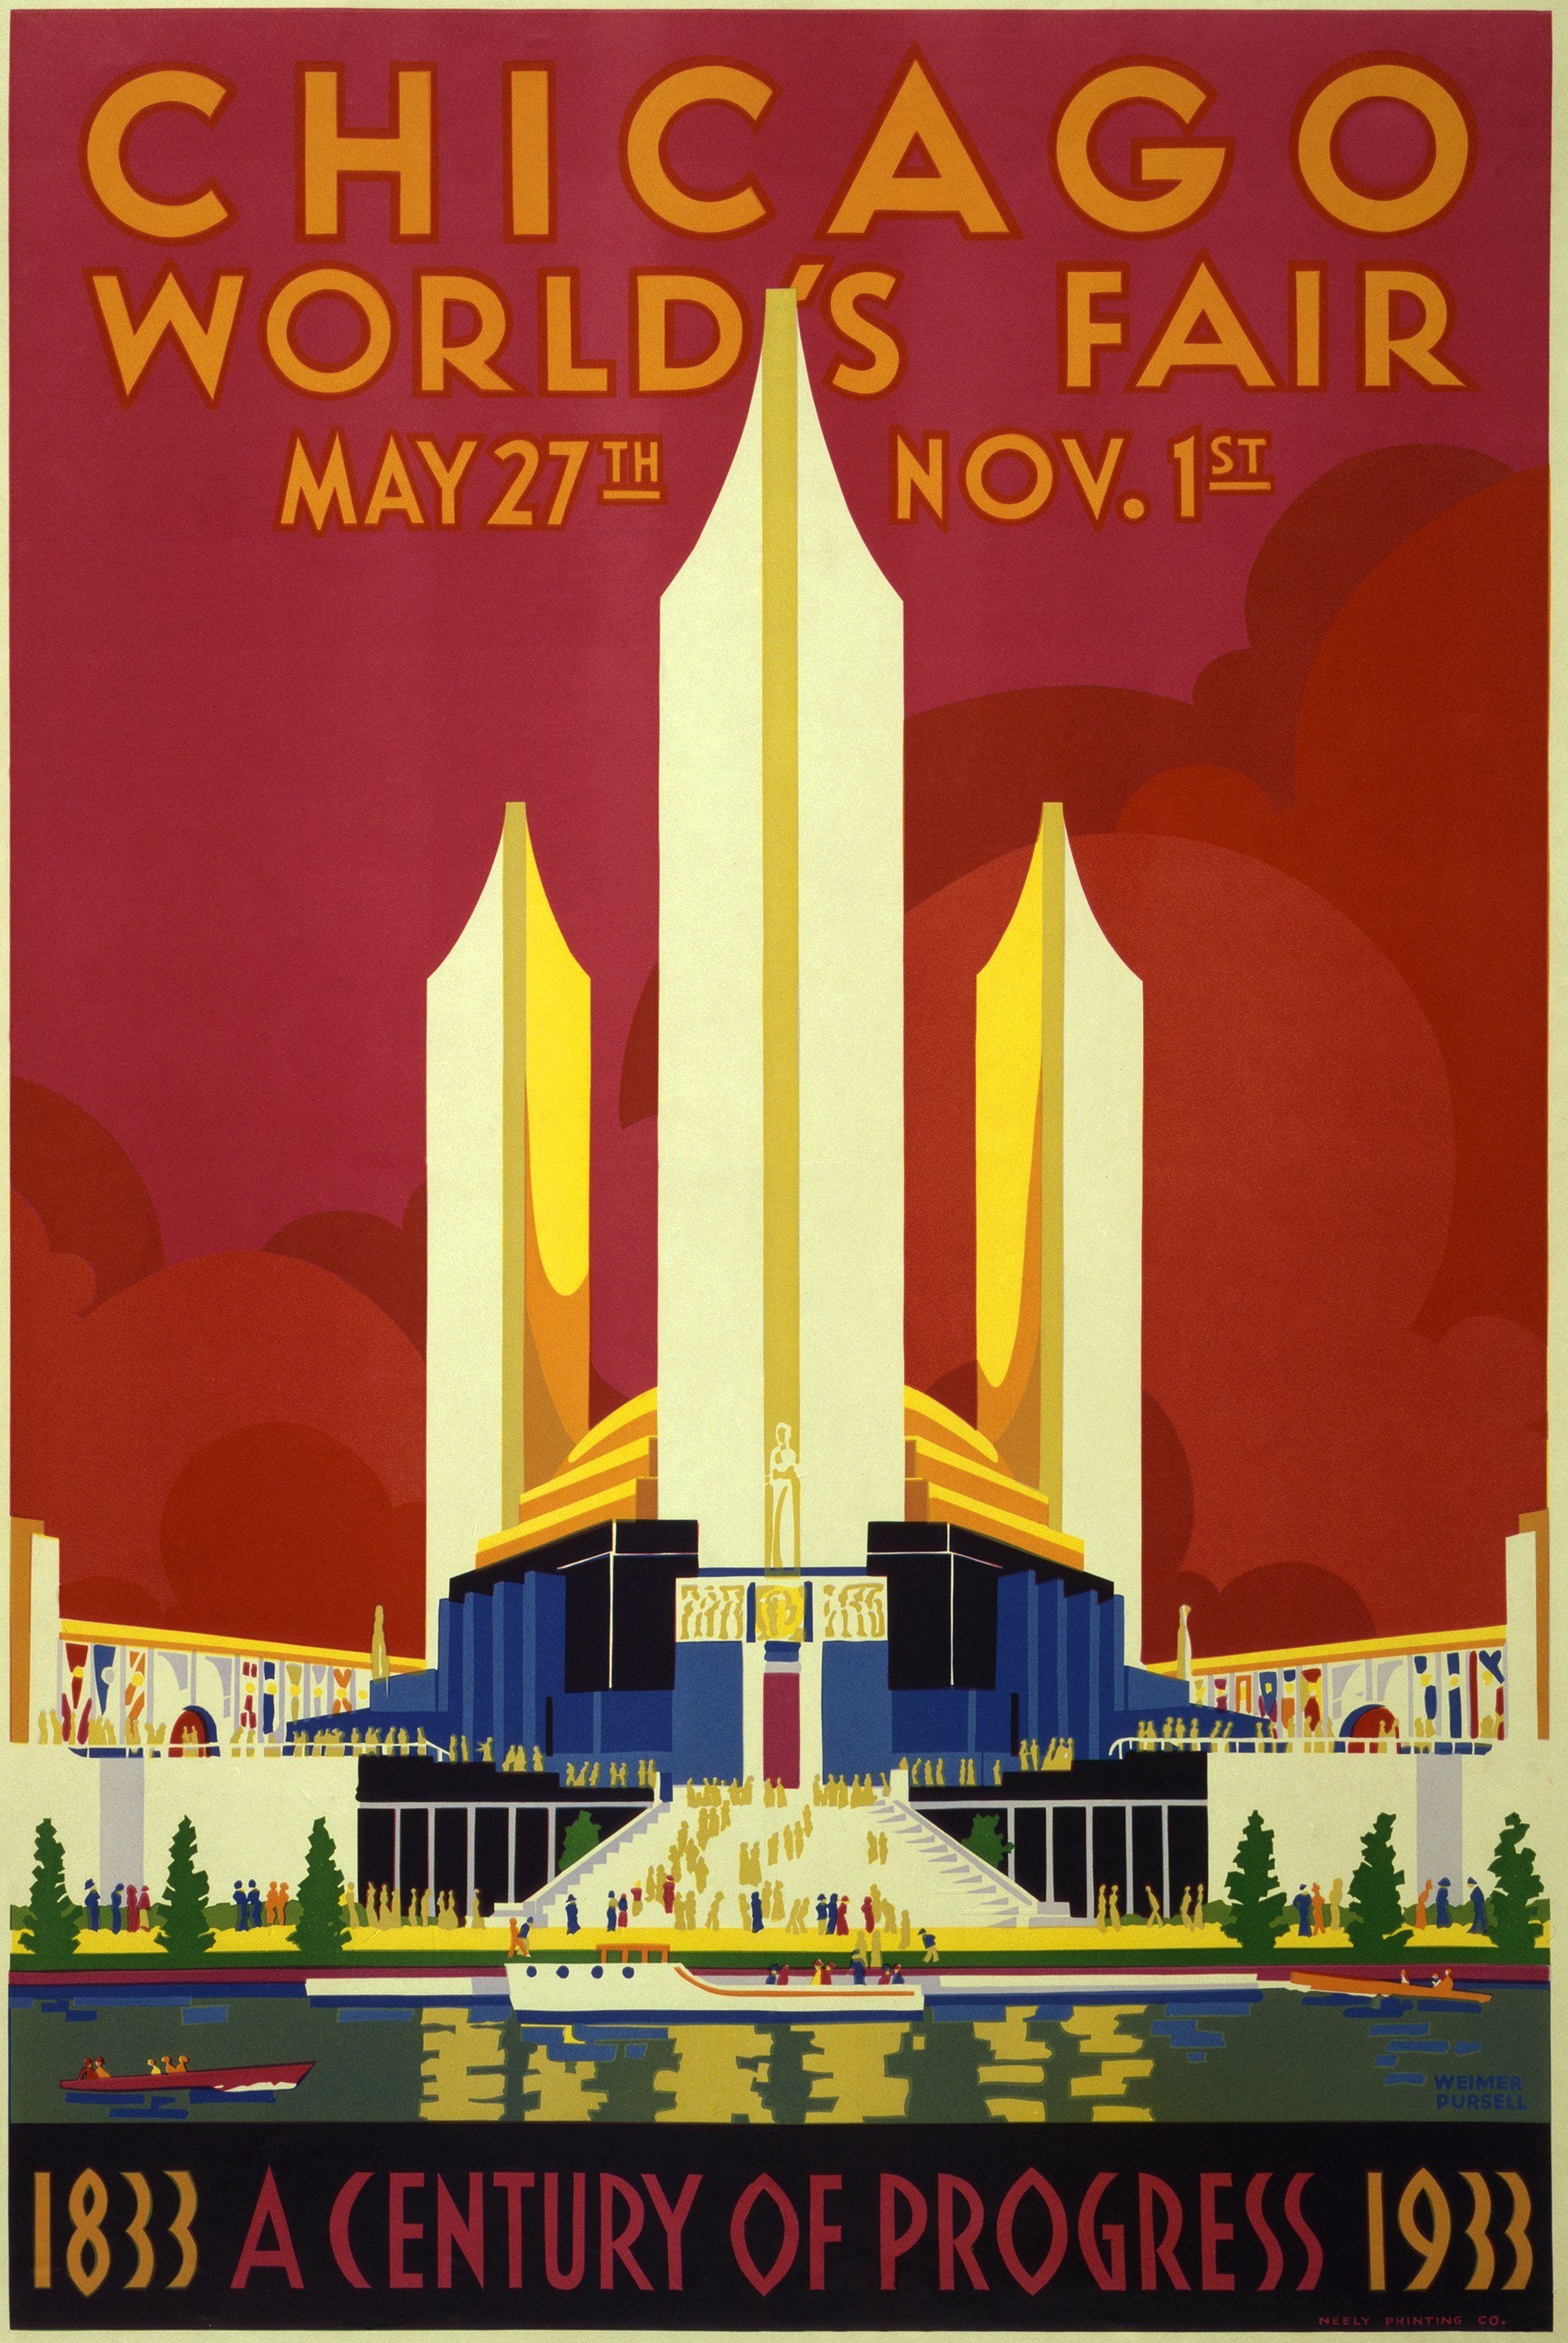 Chicago World's Fair 1933 | Gallery quality art prints – The ...